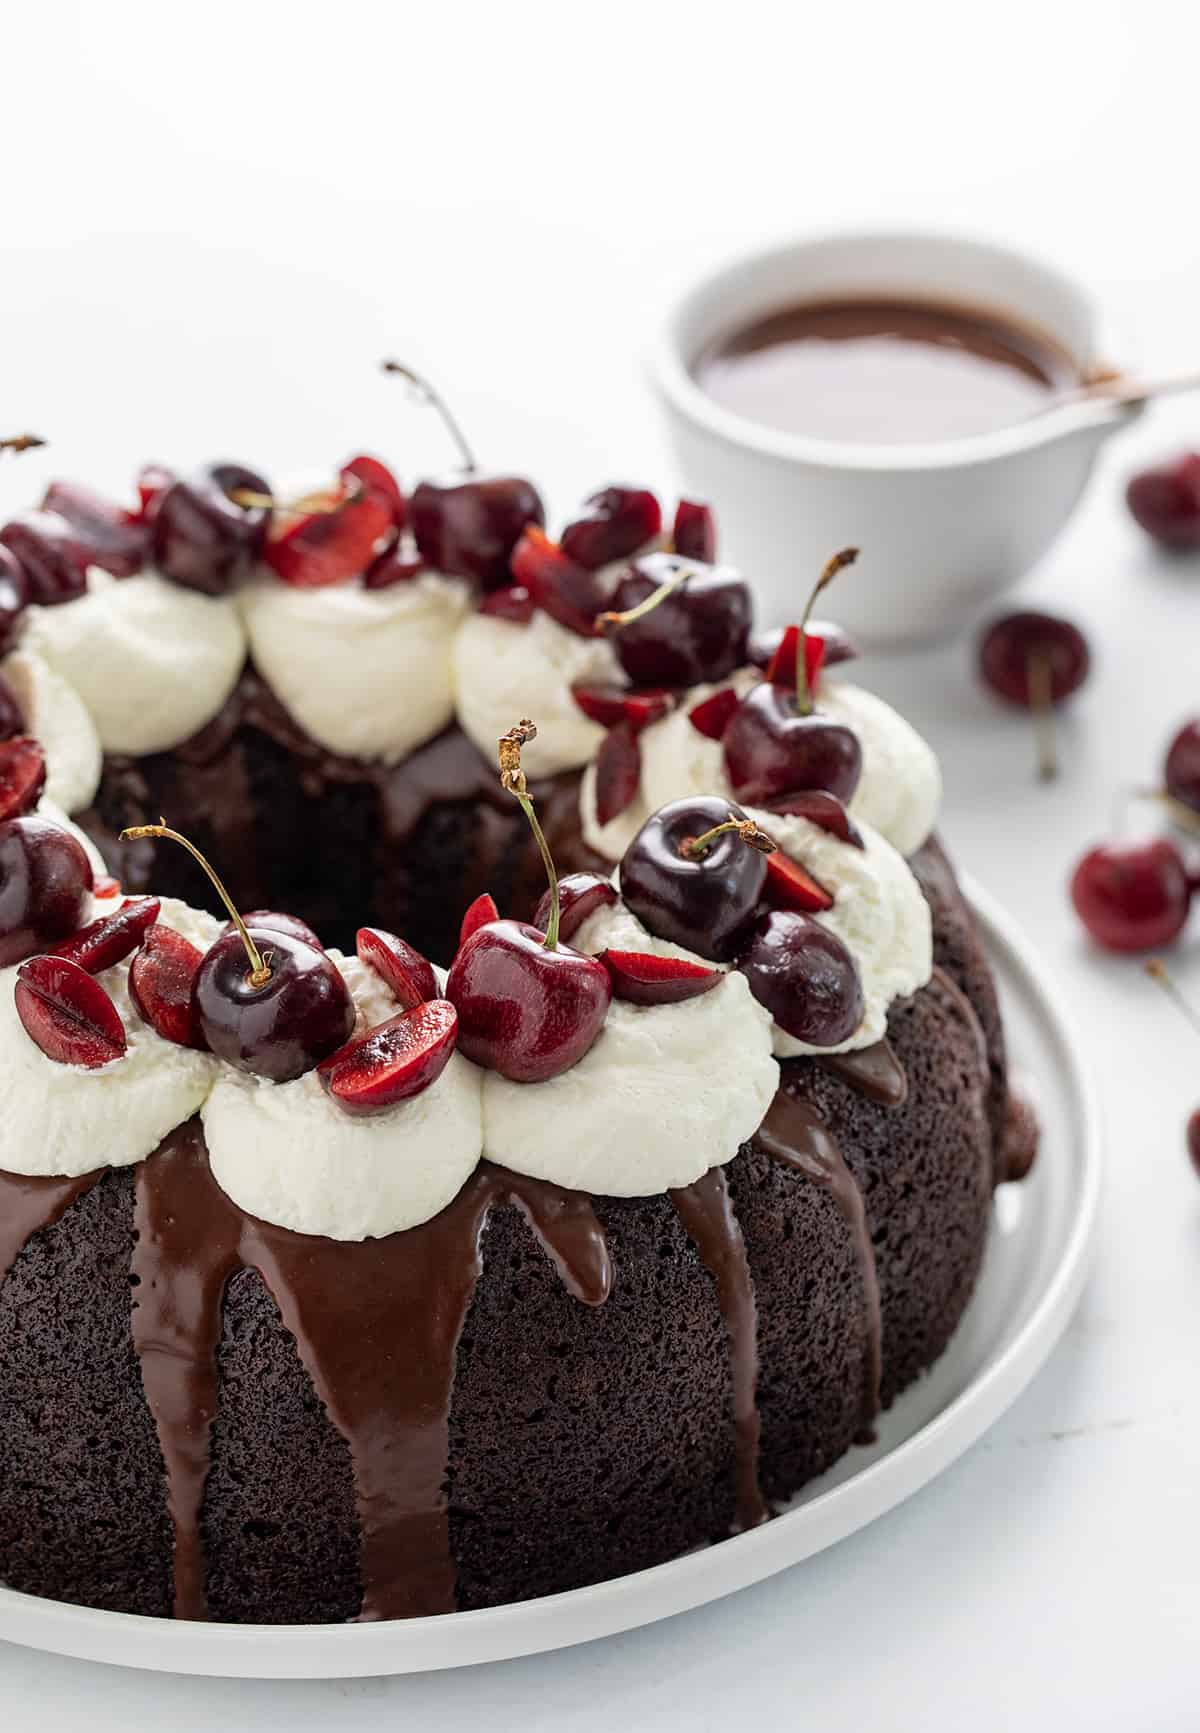 Close up of a Black Forest Bundt Cake on a White Counter Focusing on the Fresh Cut Cherries Sitting on Whipped Topping.